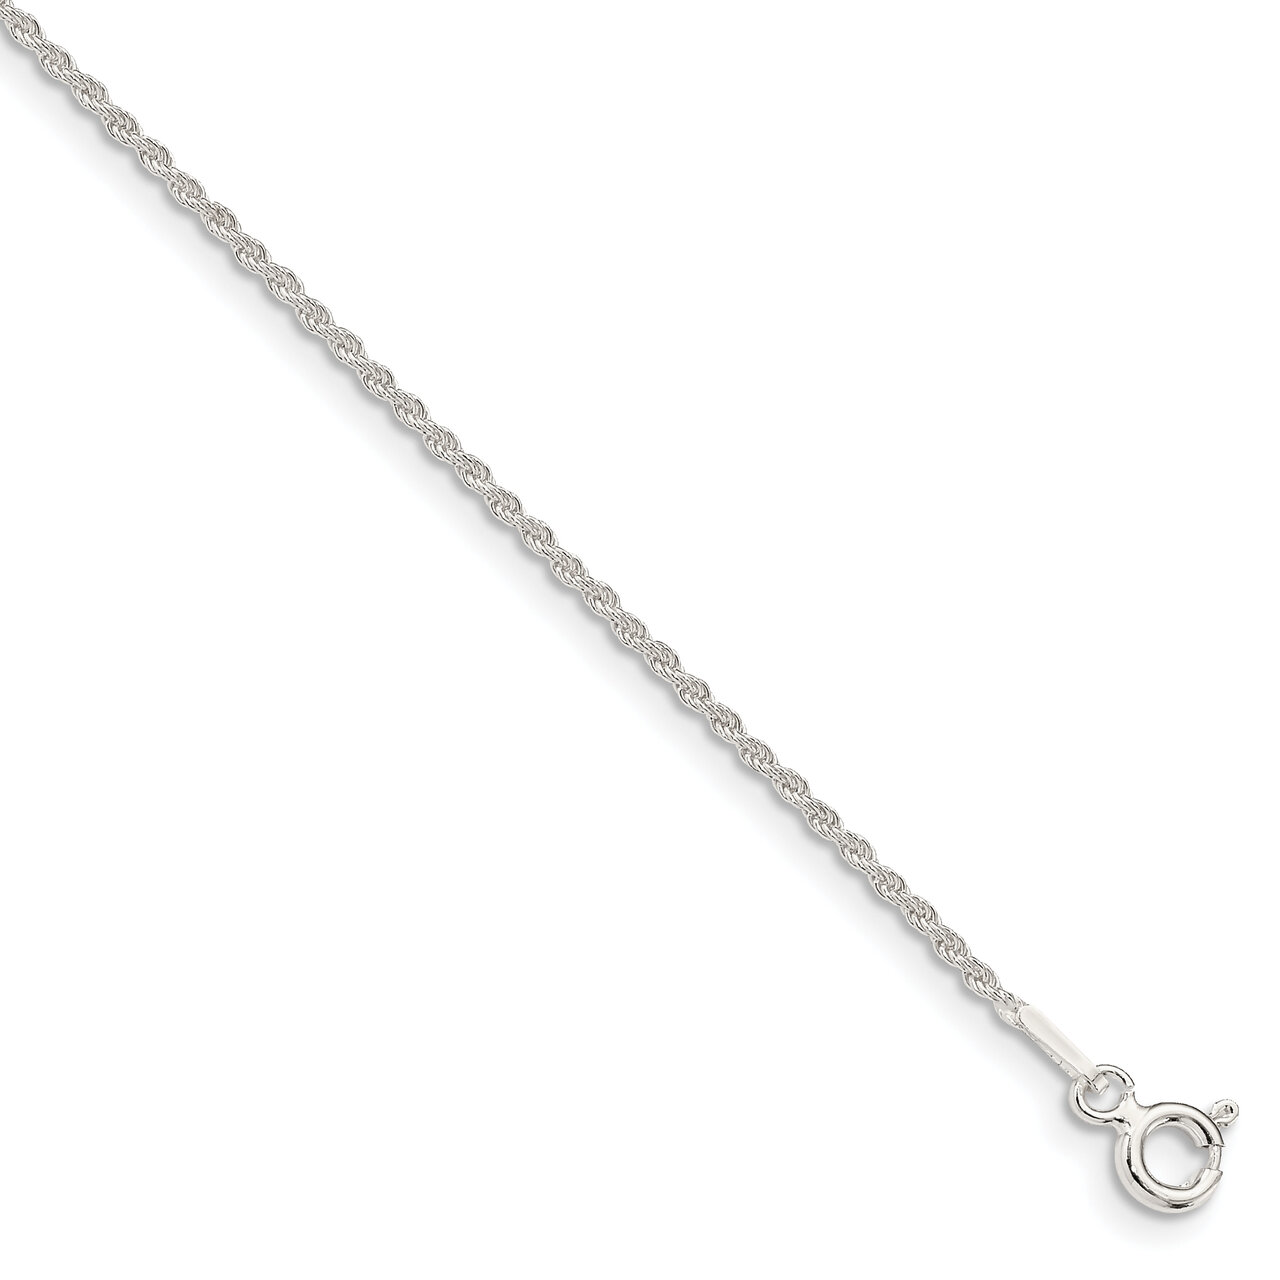 10 Inch 1.3mm Solid Rope Chain Sterling Silver QDR025-10